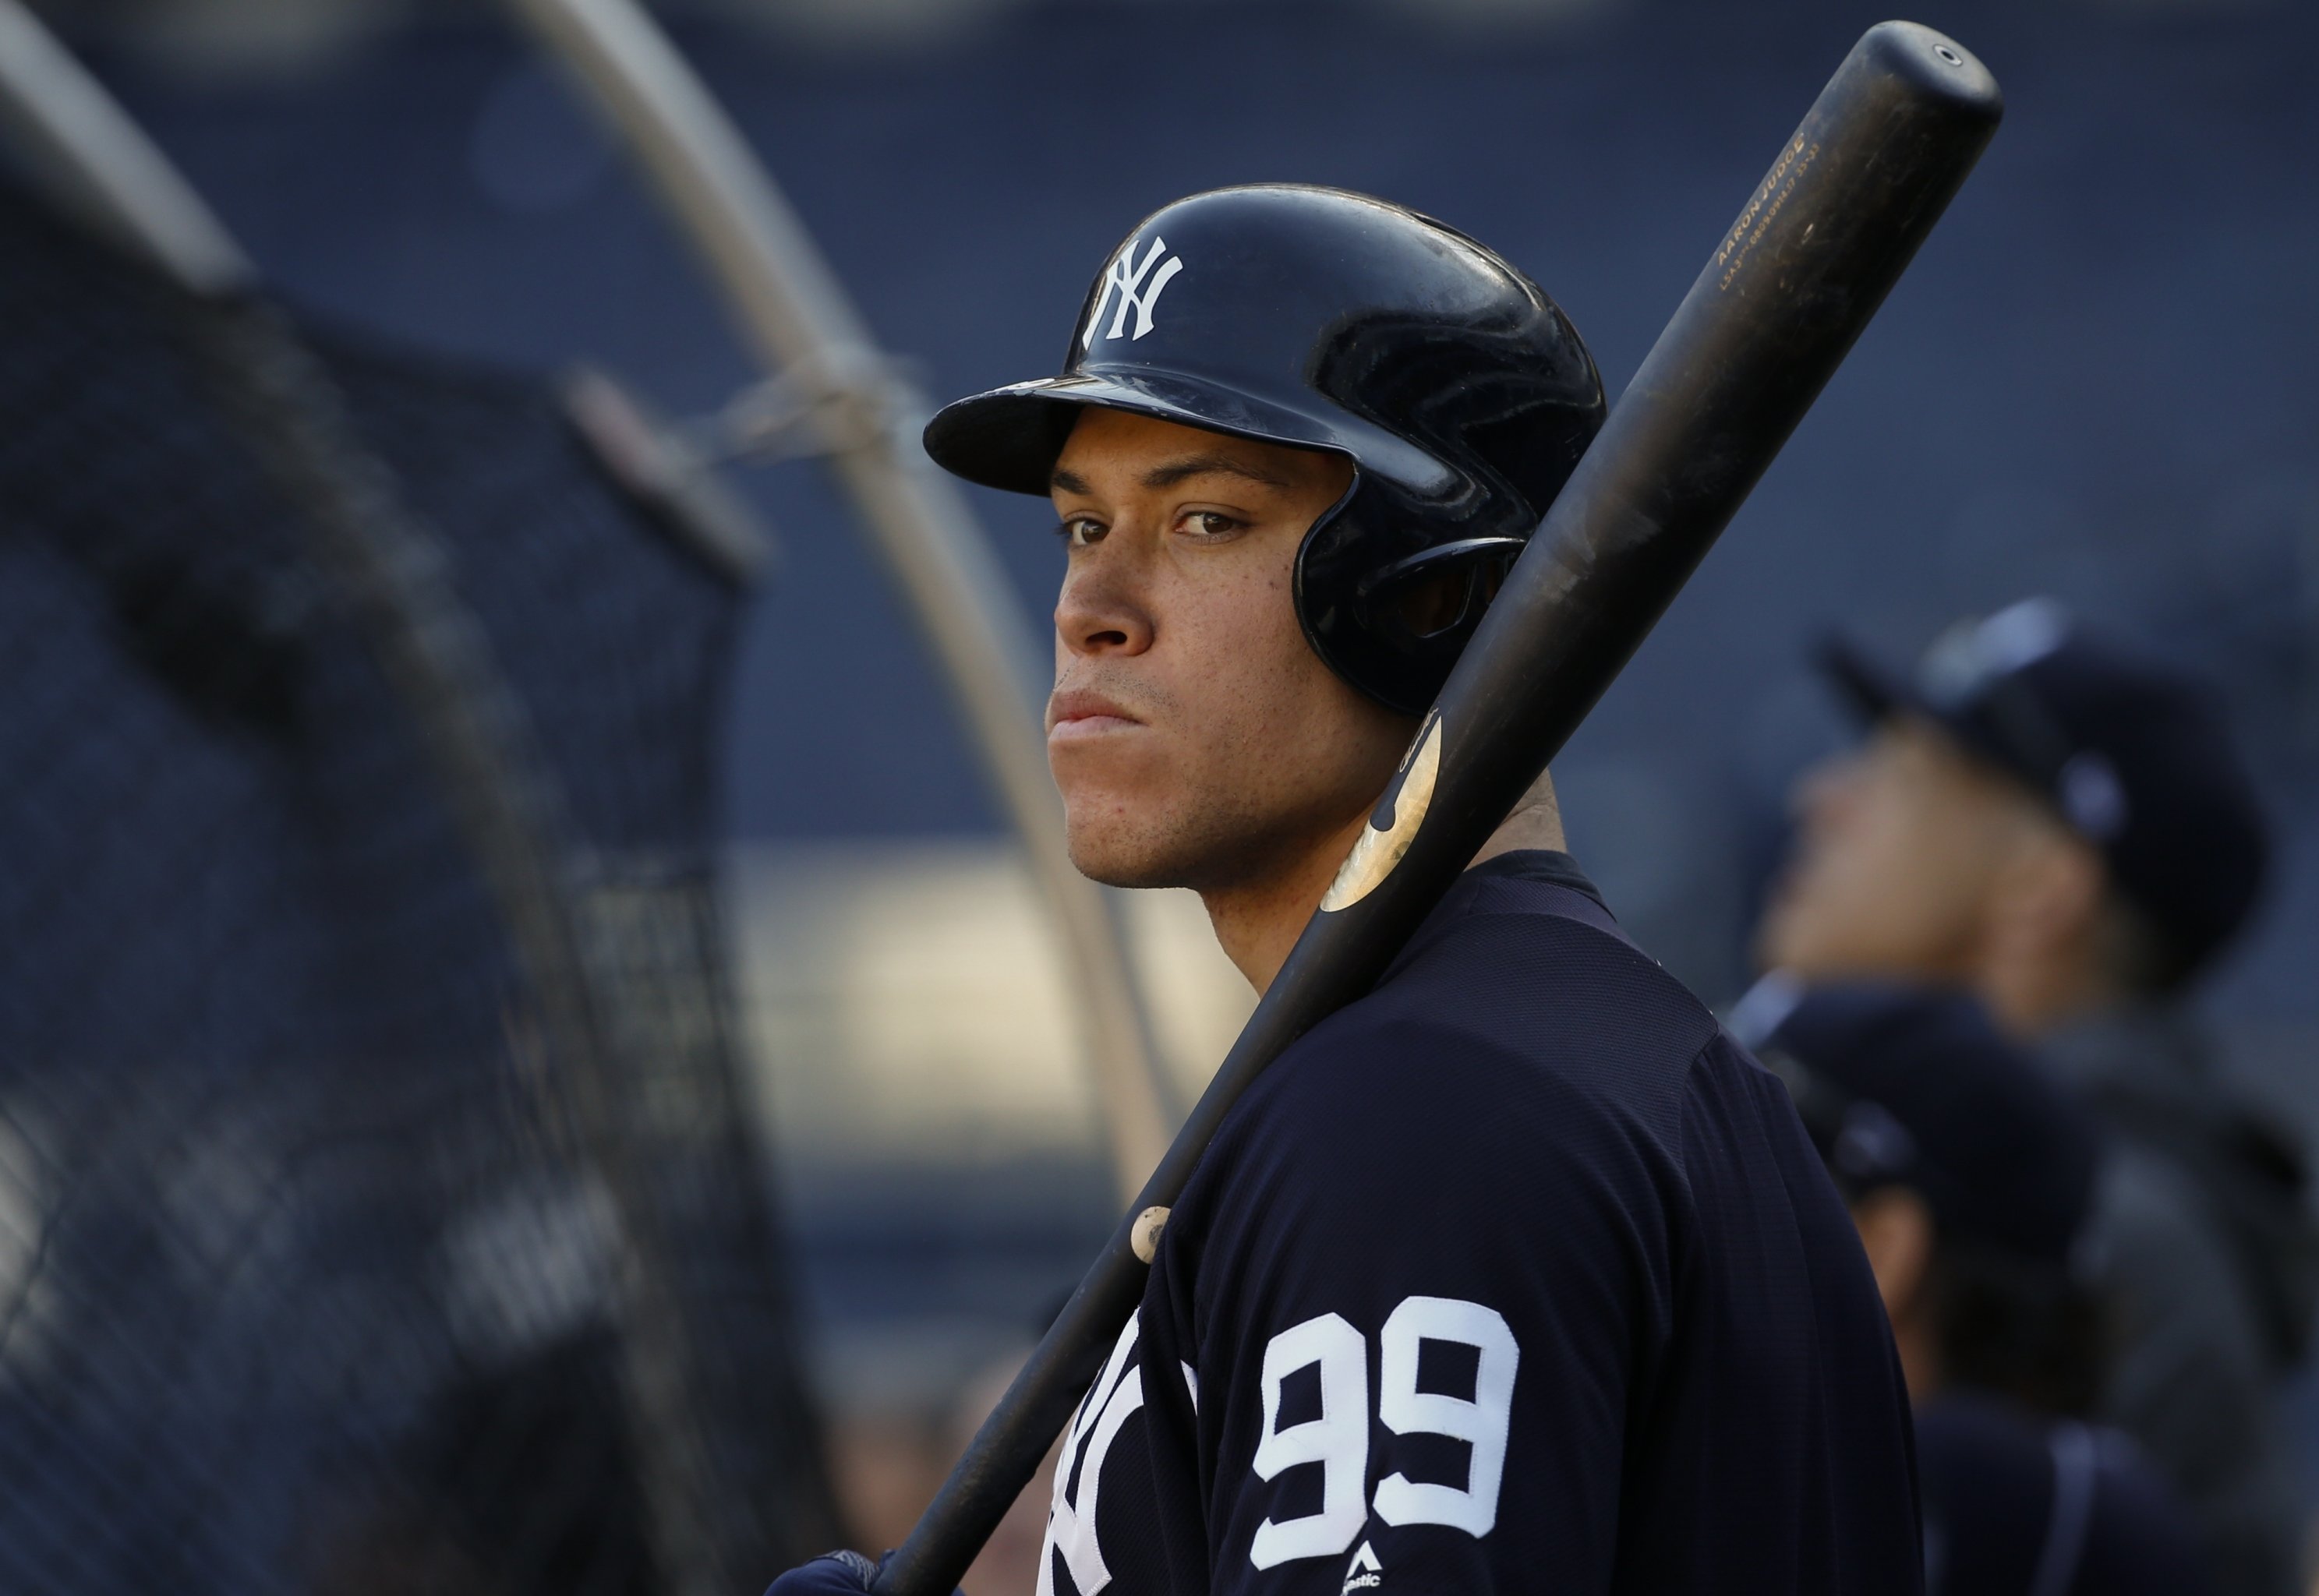 Aaron Judge switches equipment to Adidas from Under Armour